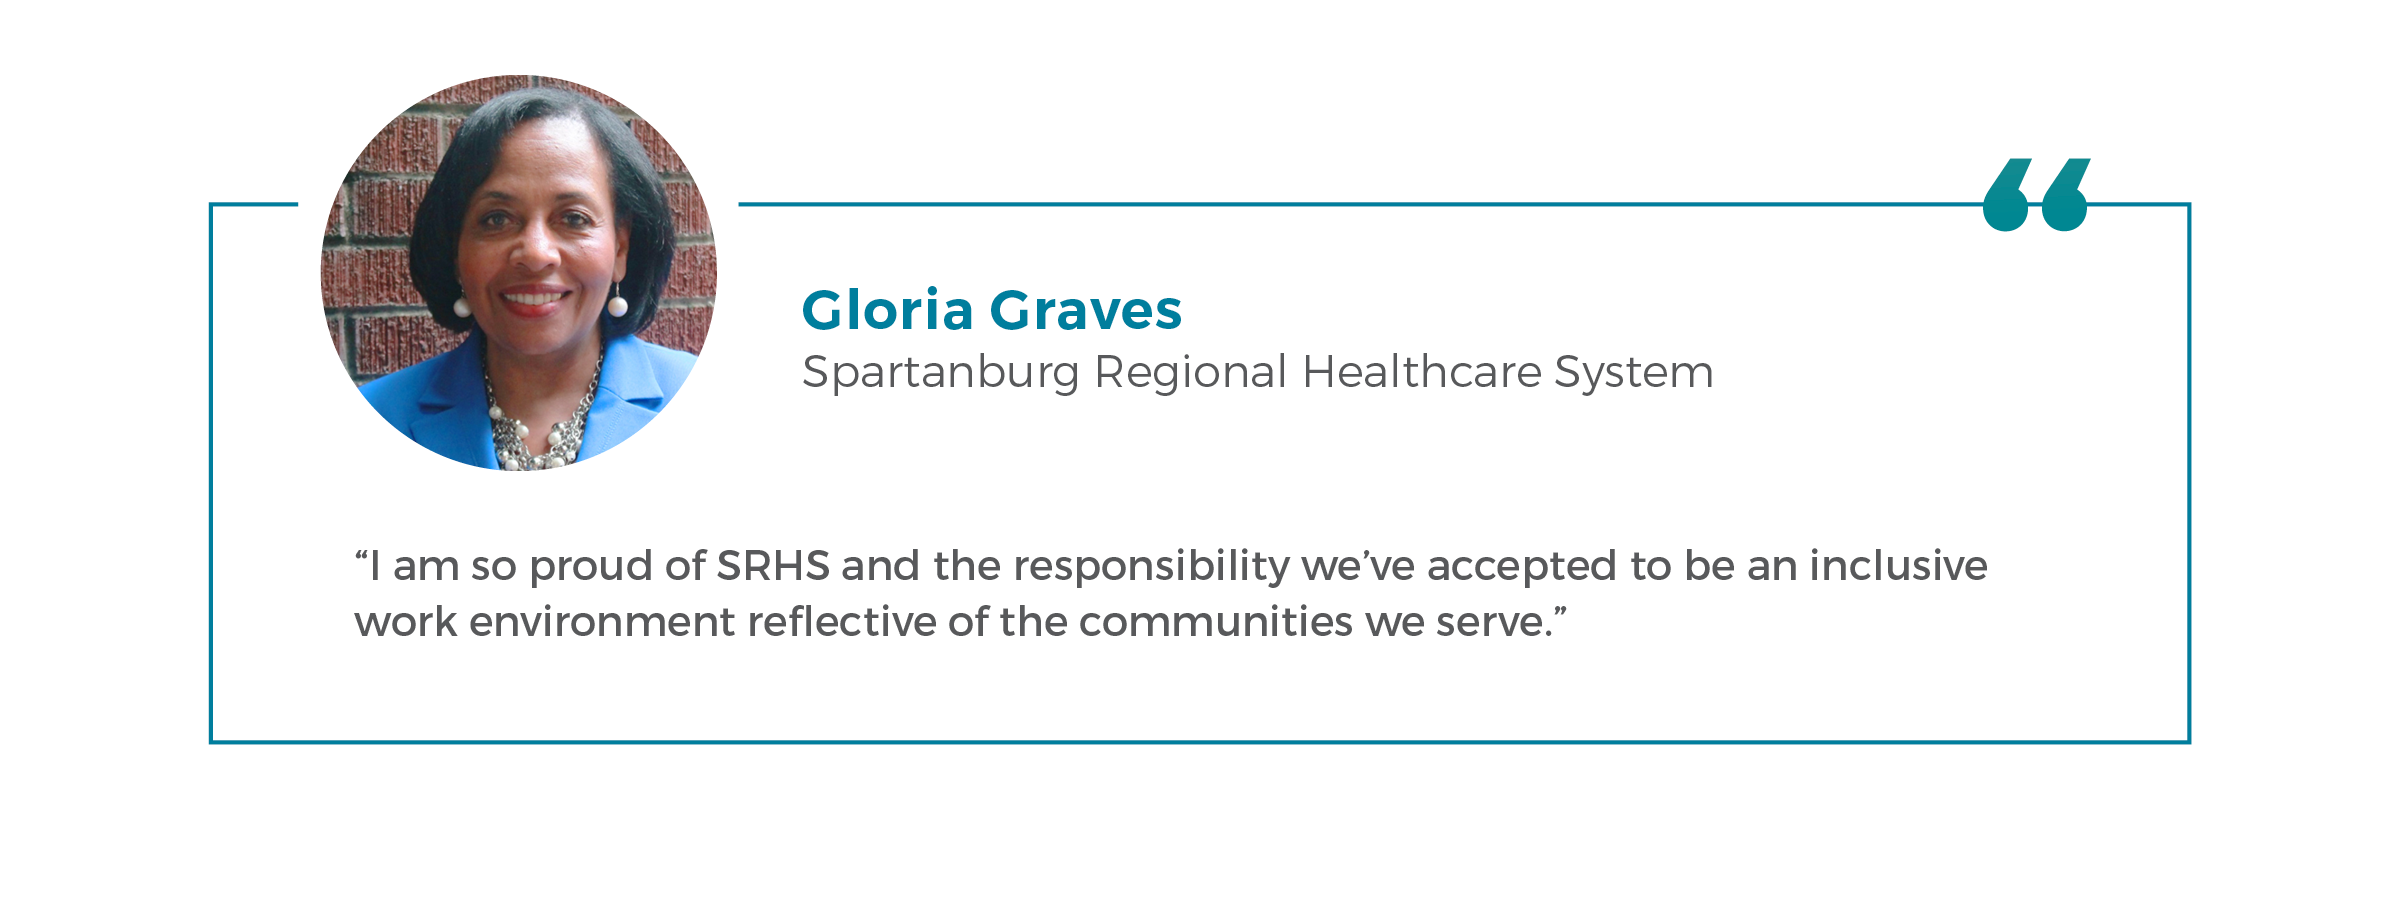 A headshot of Gloria Graves from Spartanburg Regional Healthcare System with the quote 